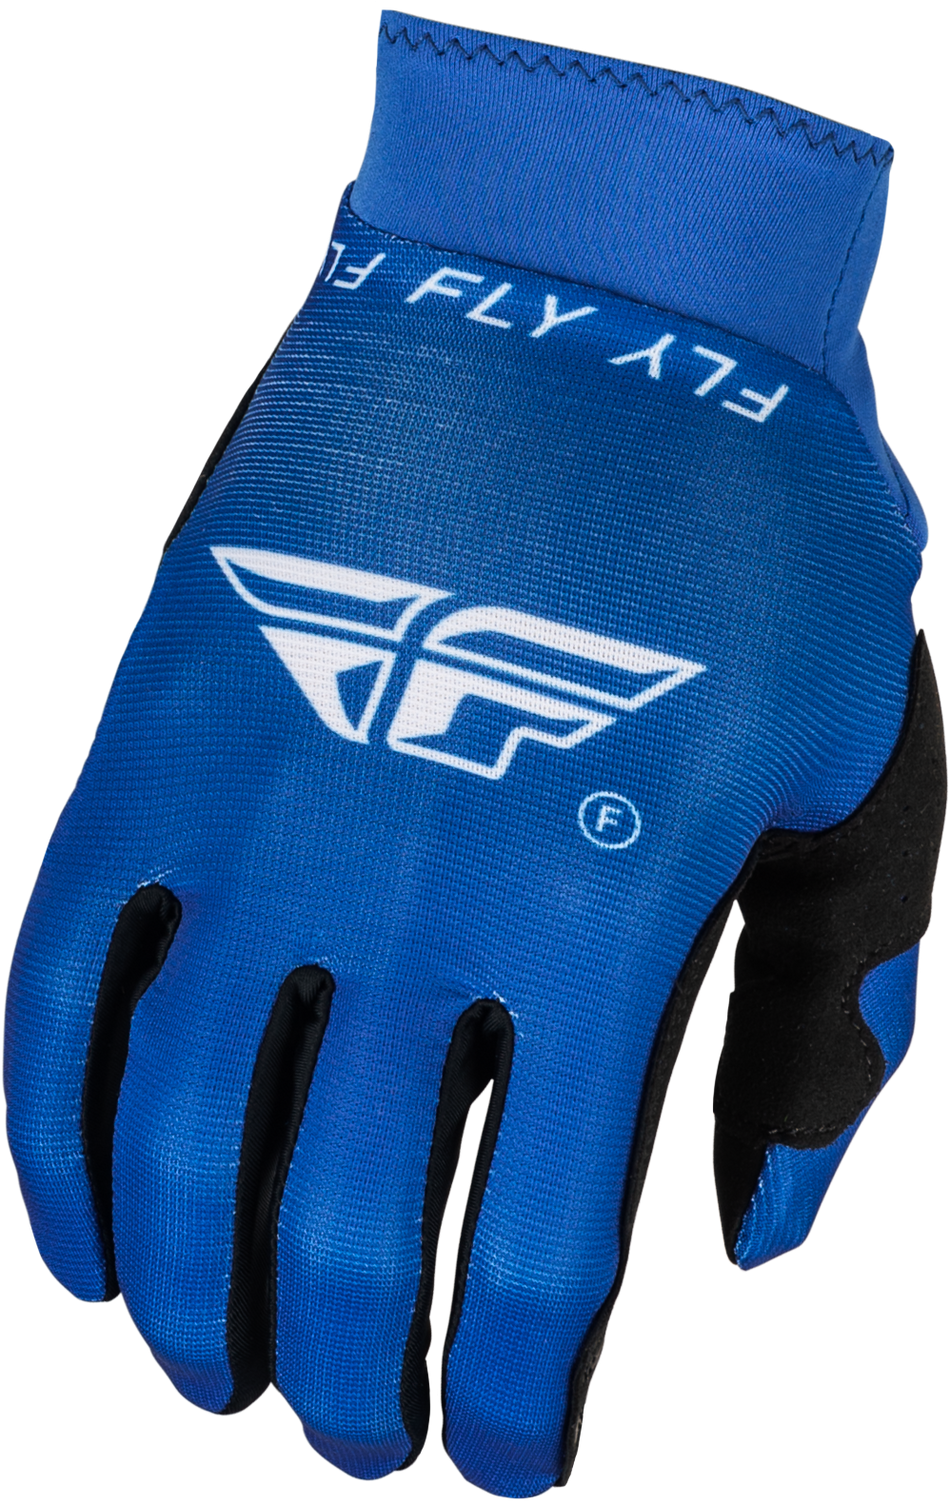 FLY RACING Pro Lite Gloves Blue/White 3x 377-0413X